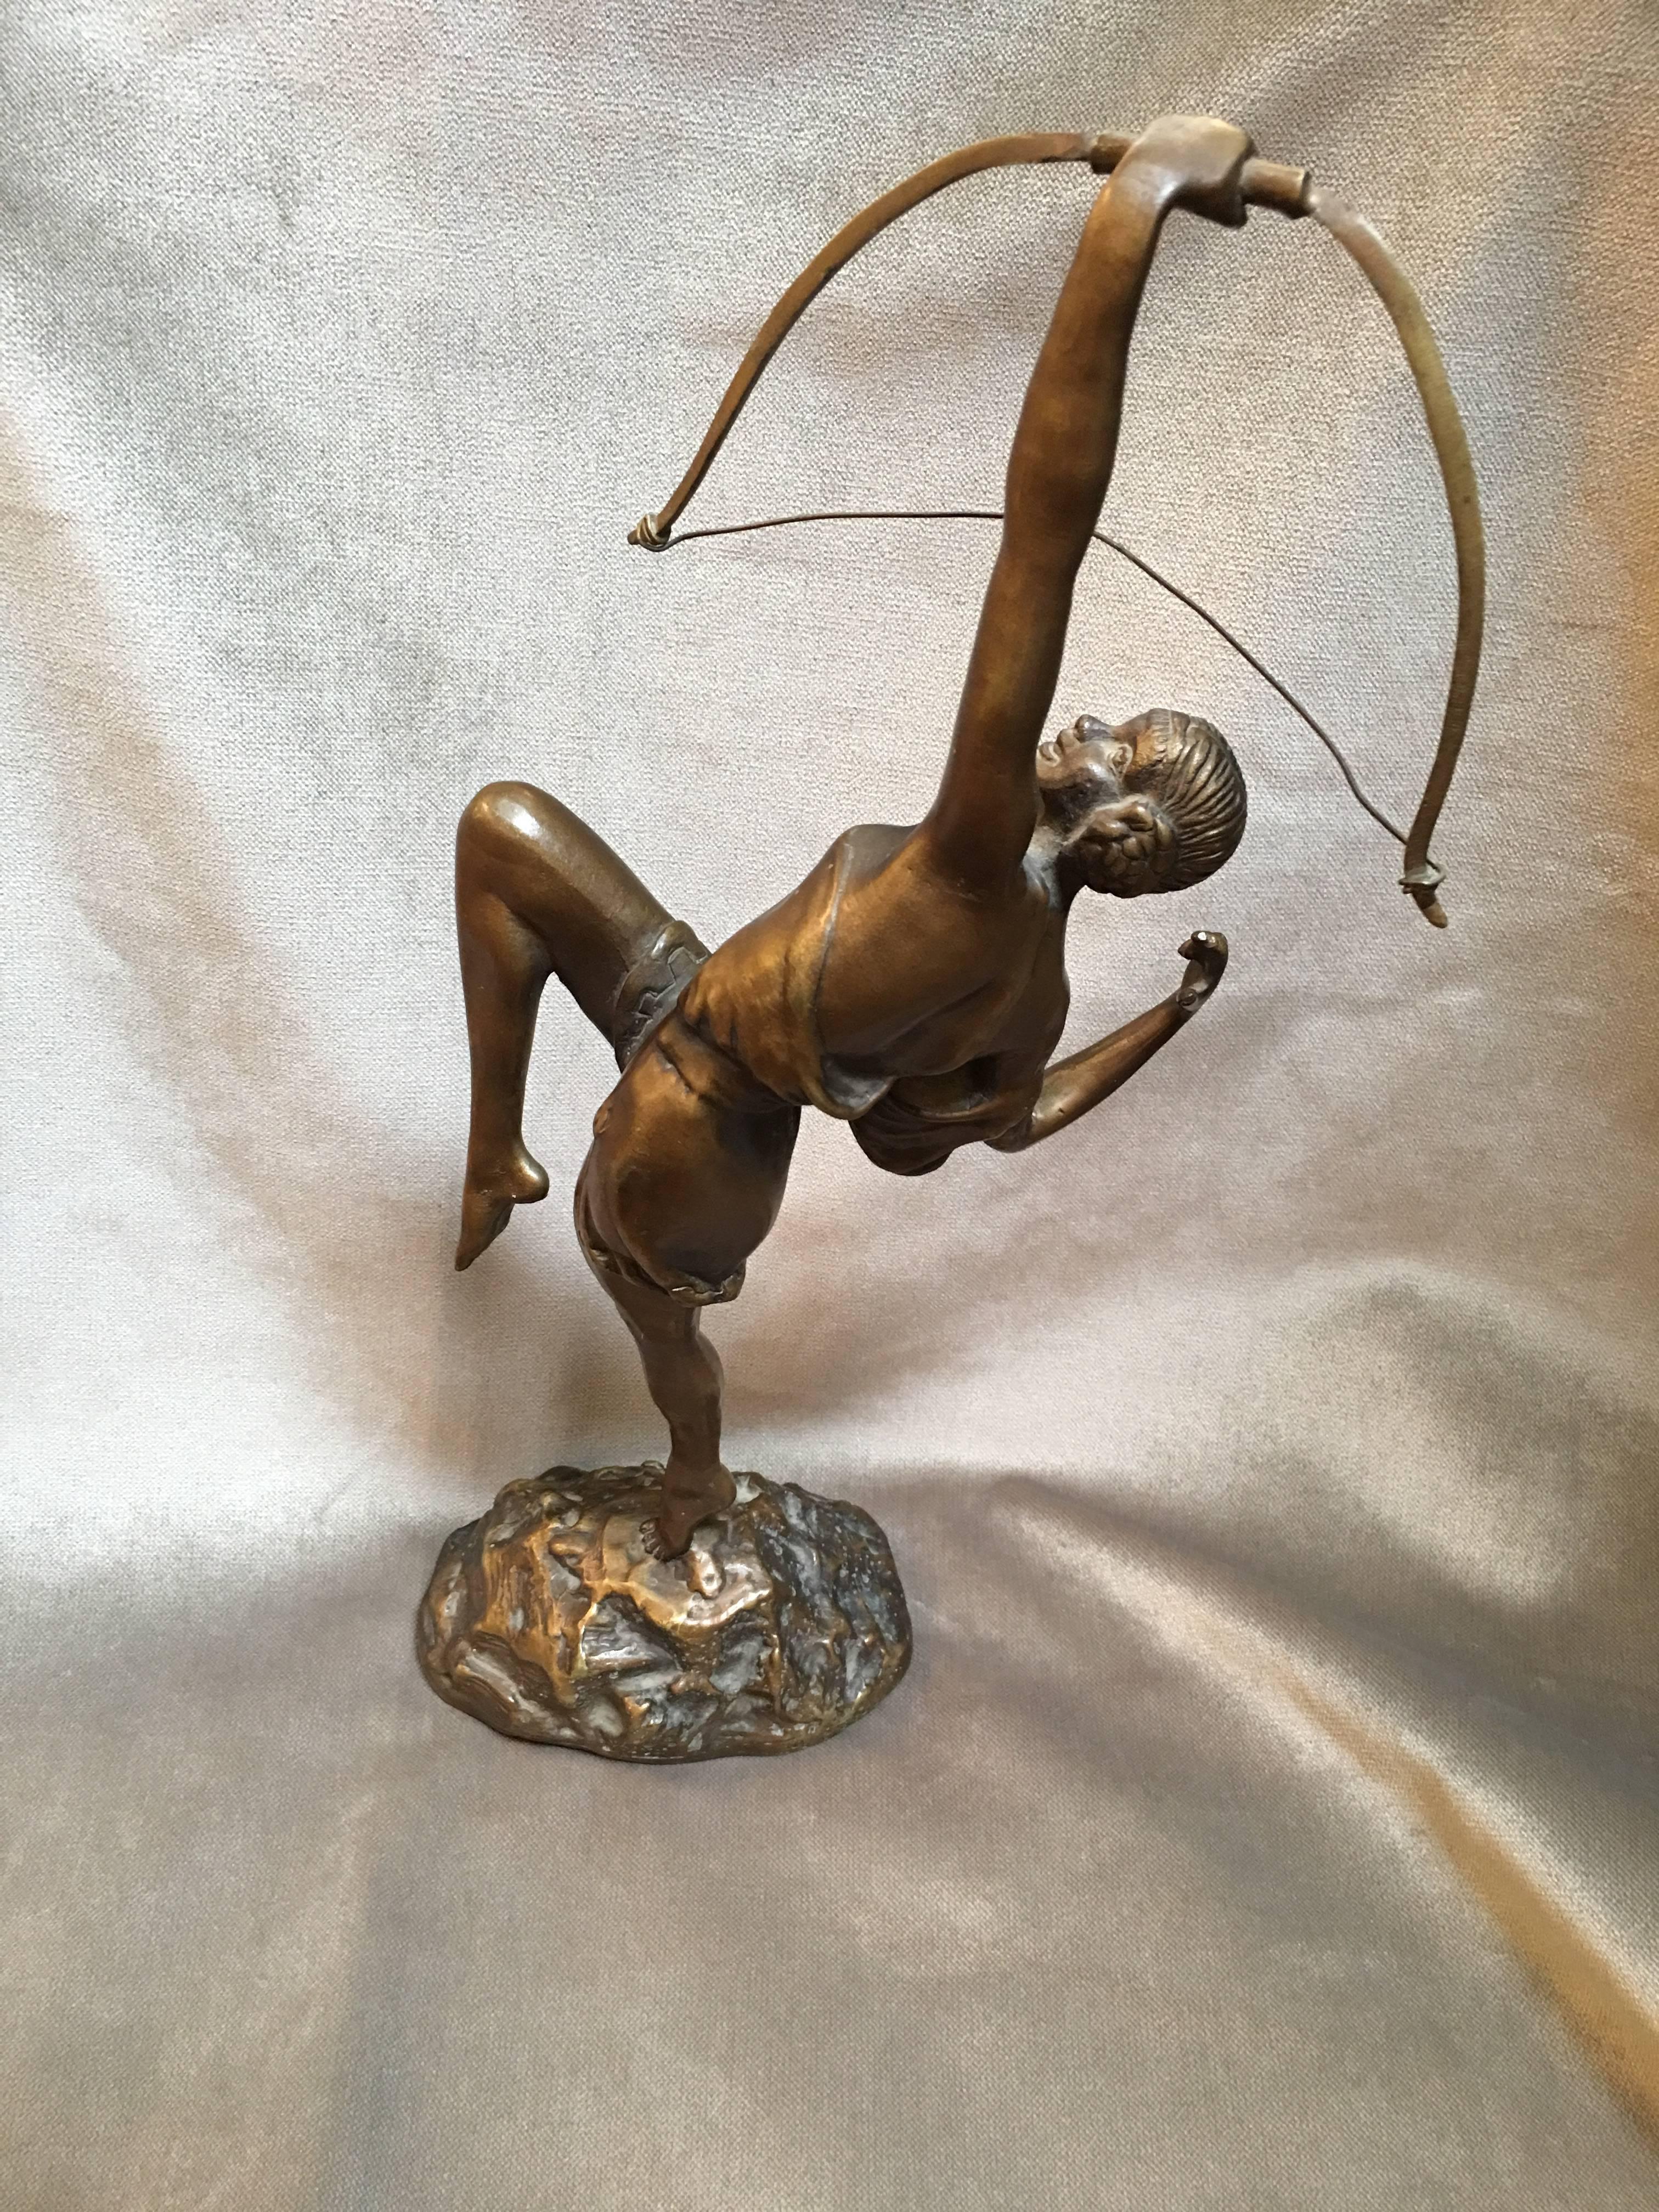 Designed by French sculptor Pierre Le Faguays, circa 1925, this Art Deco bronze statue features a young Grecian female Archer gracefully pulling her bow. The statue highlights exquisite detailing on a naturalistic base. The Sculpture is titled